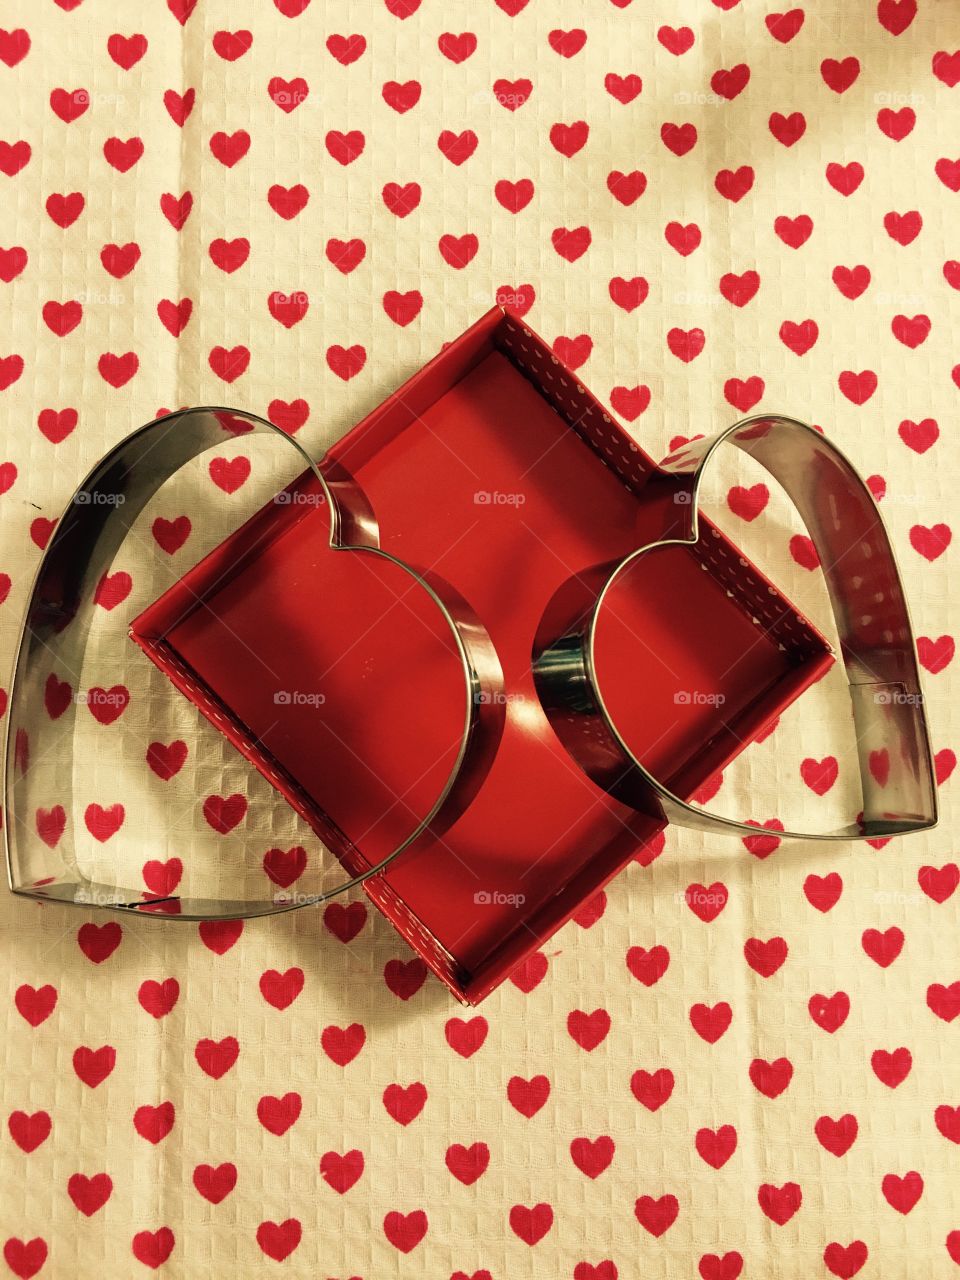 Heart cookie cutters